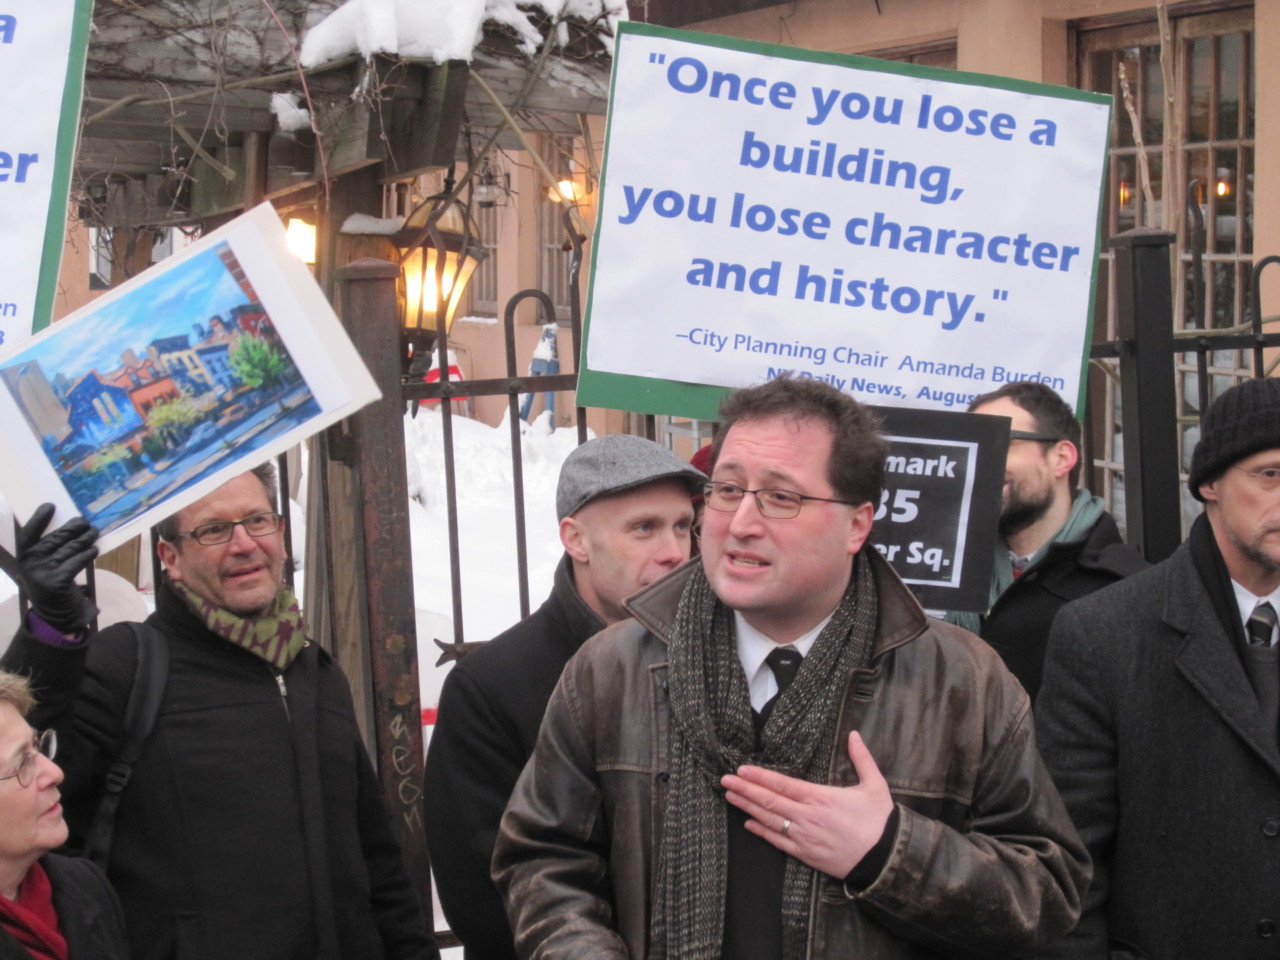 Simeon bankoff in front of a crowd of protestors with signs